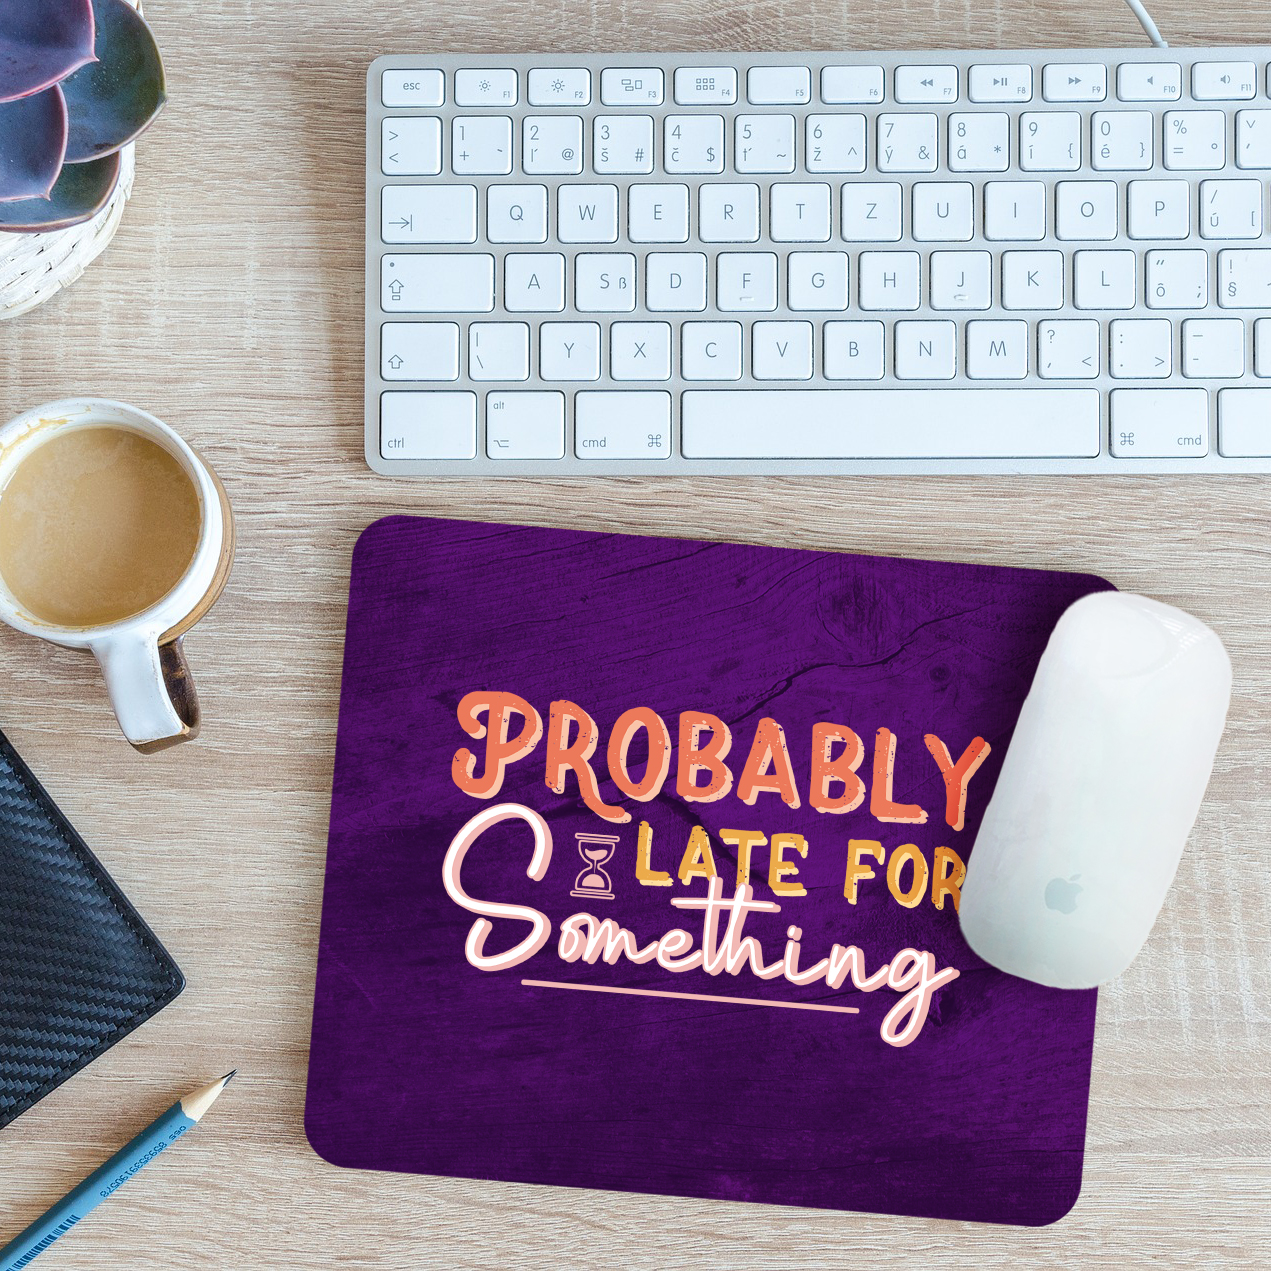 Probably Late For Something Mouse Mat Pad Funny Joke T 24cm X 19cm Ebay